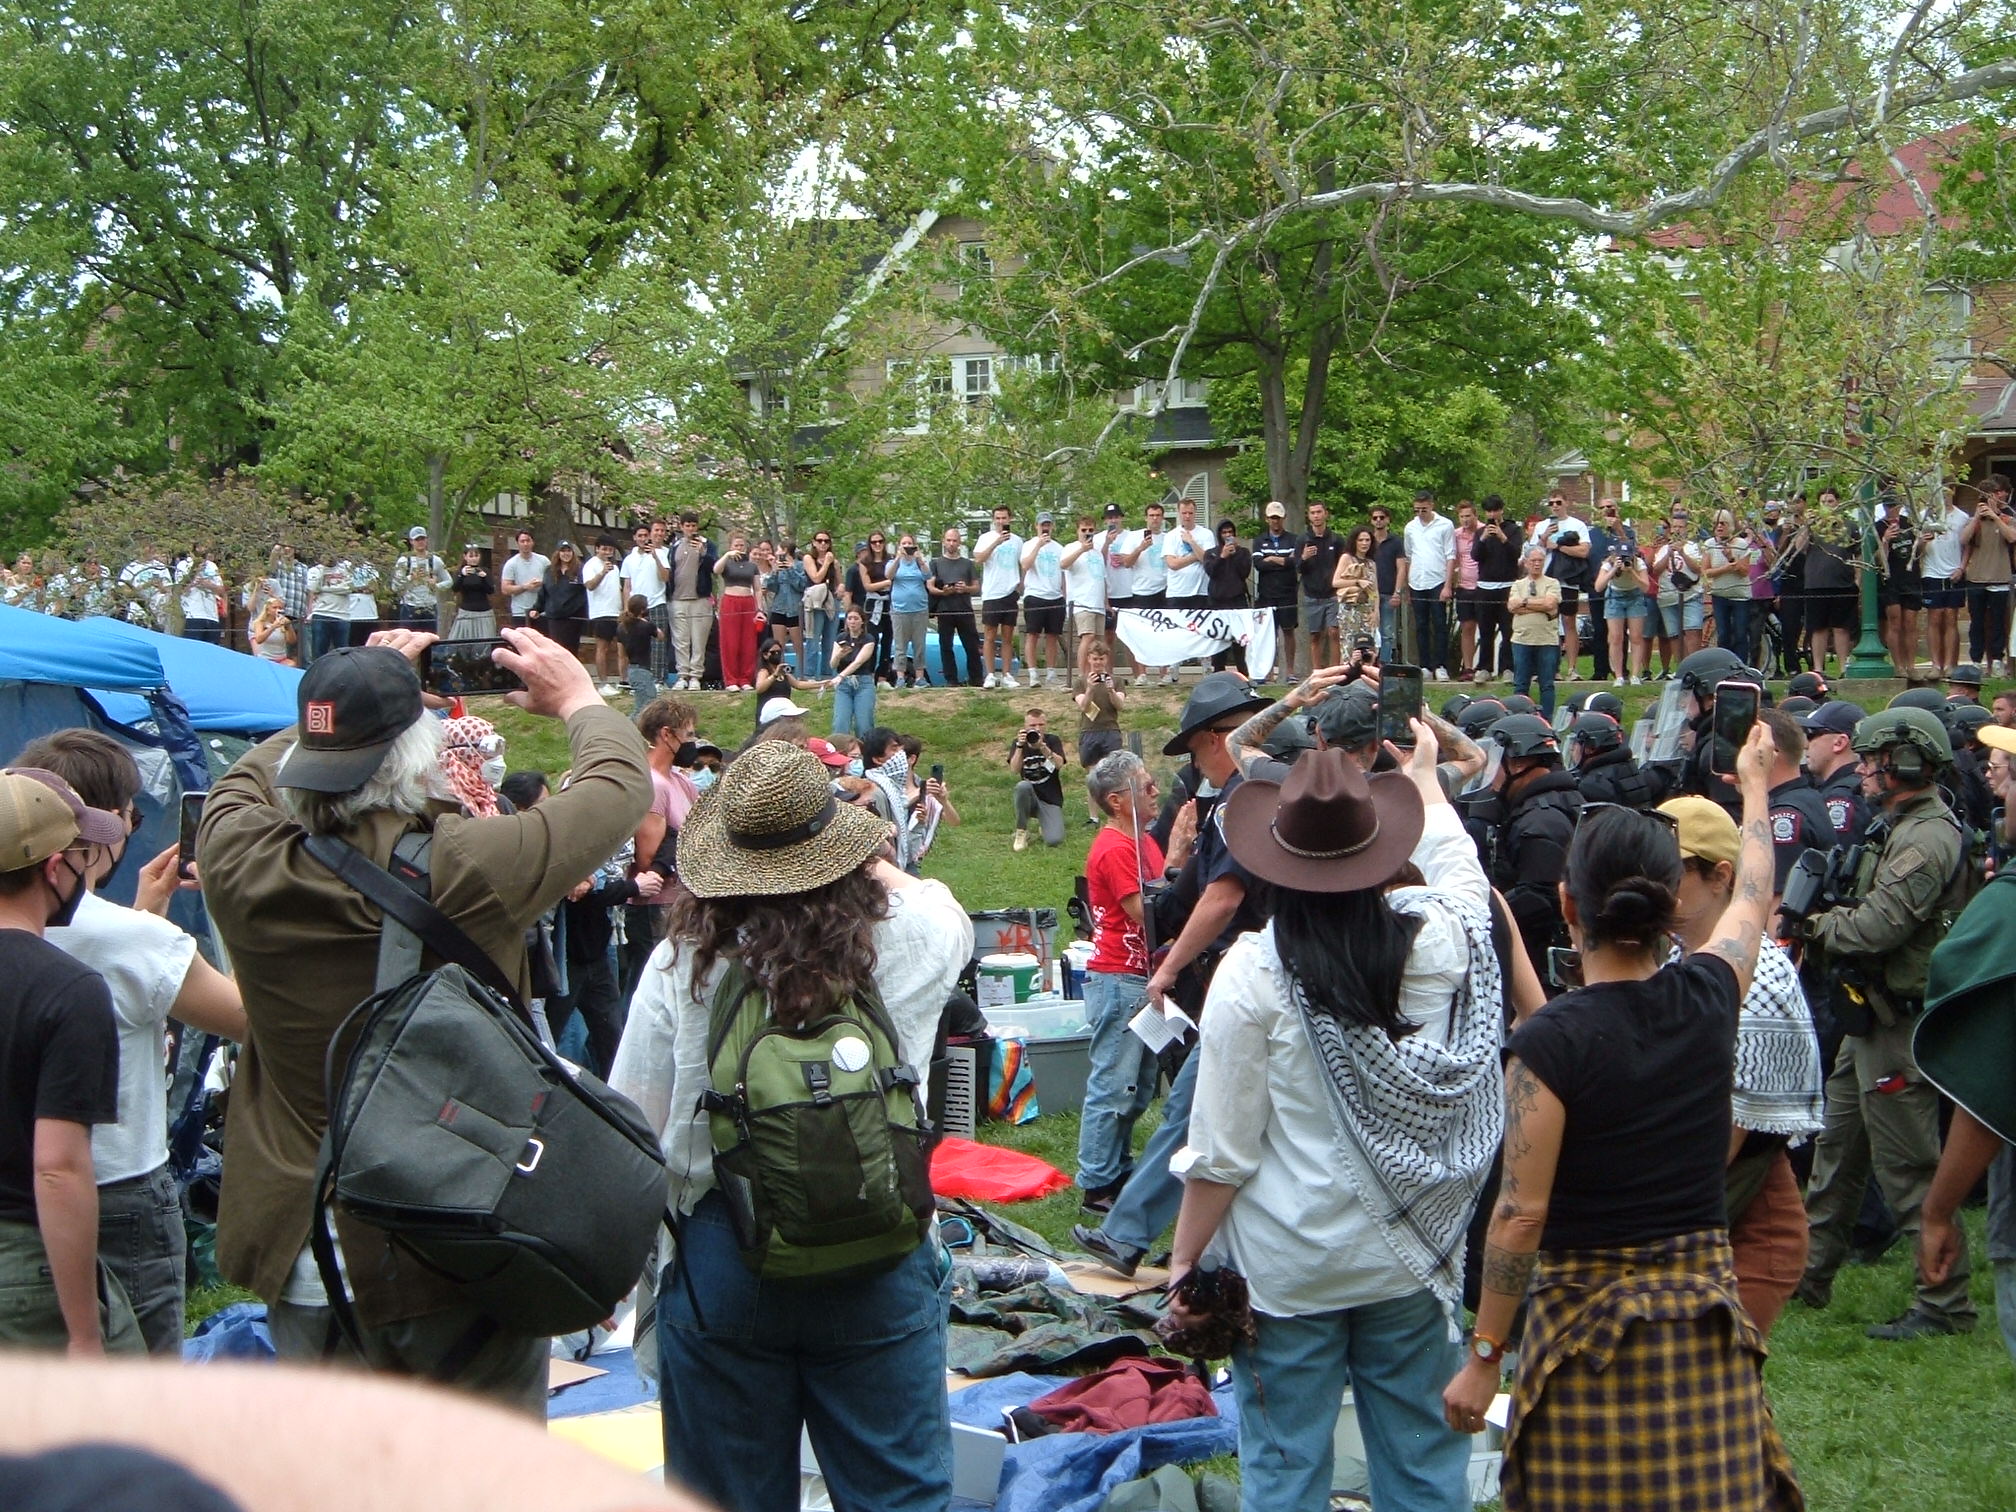 Indiana State Police in riot gear move towards the encampment. A woman in a red shirt begs the commanding officer to stop. People film the march of the riot cops. Above Dunn Meadow on the sidewalk, the crowd of observers has grown.